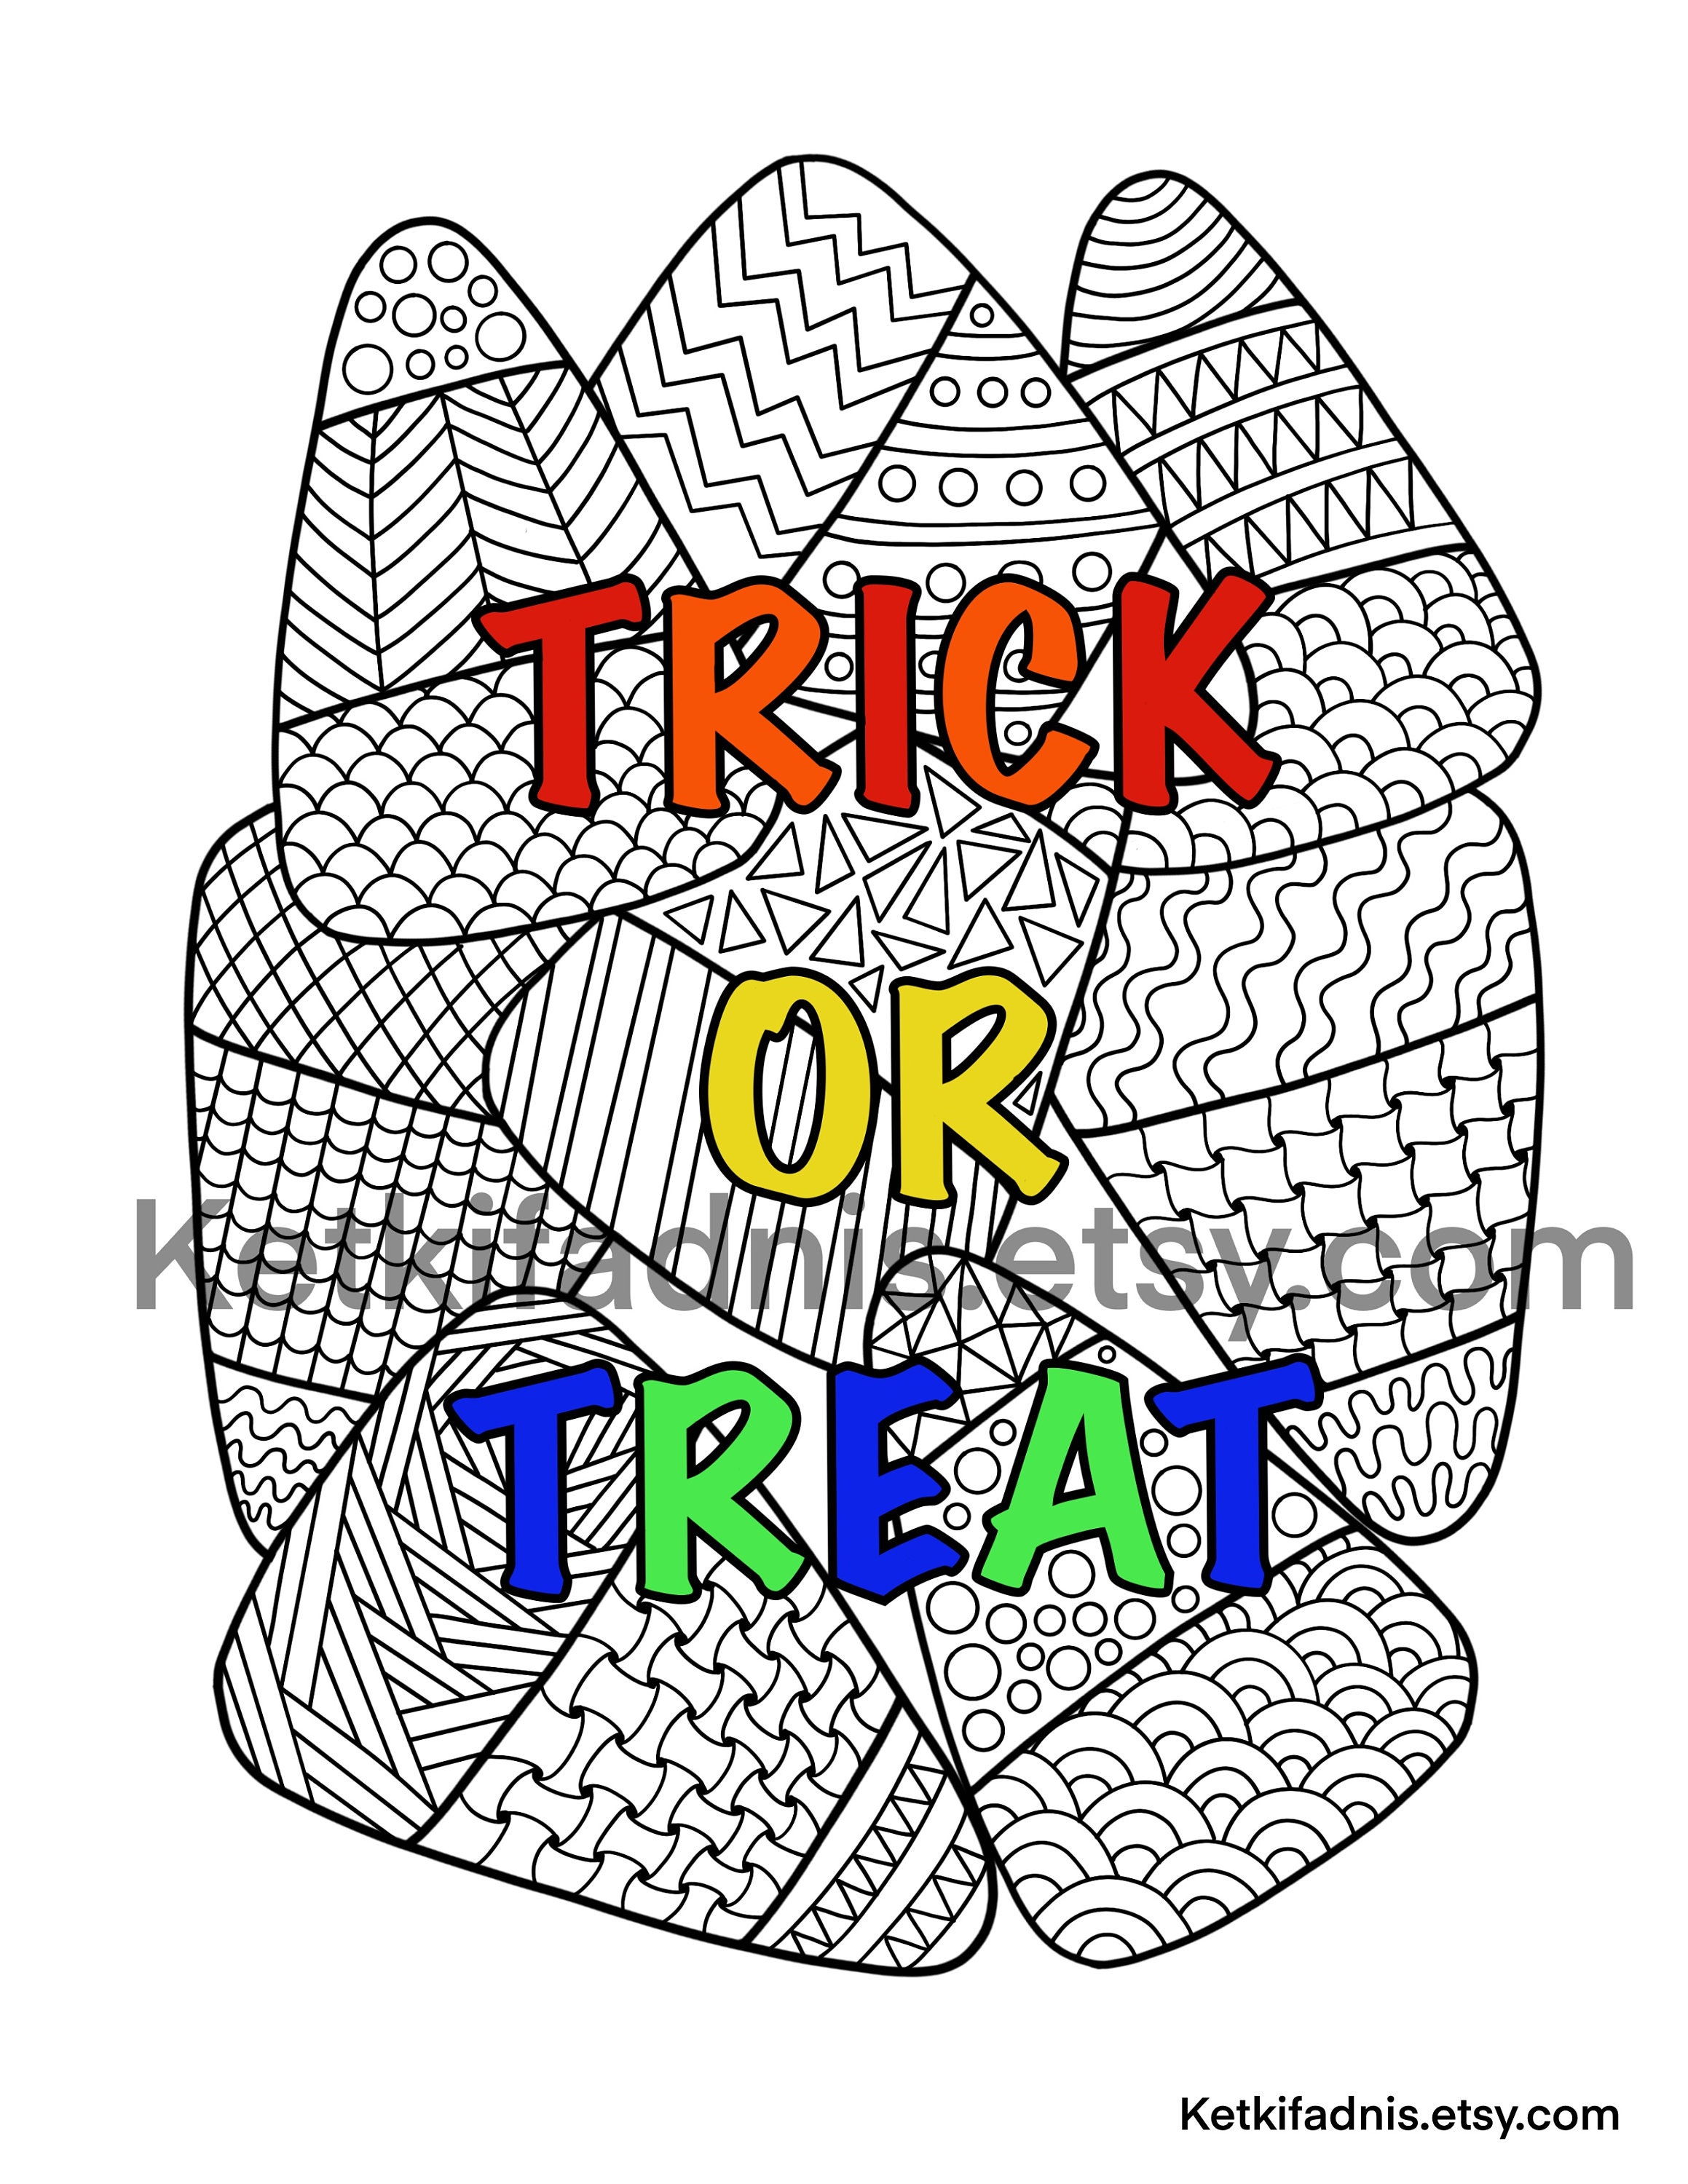 halloween candy corn coloring pages